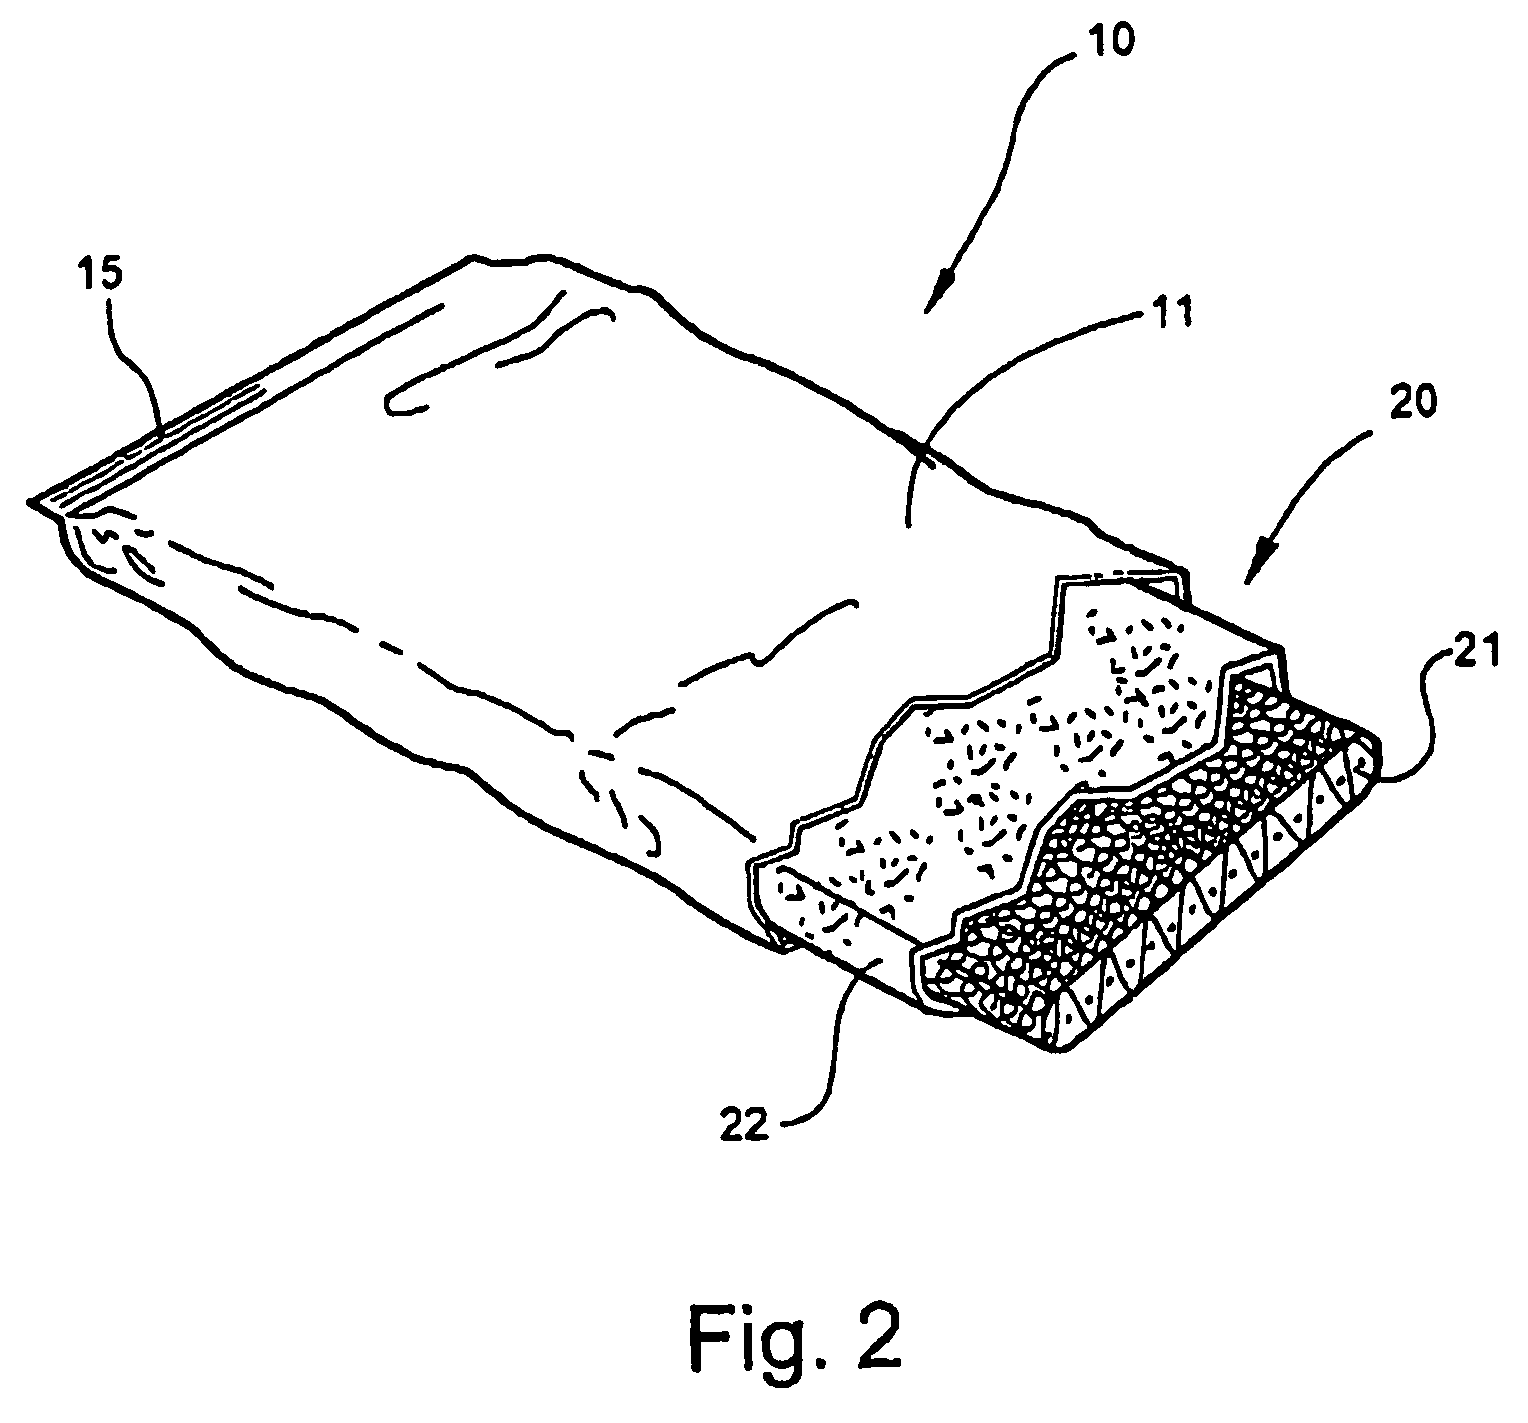 Knitted substrate for use in medical bandaging product, bandaging product and method of forming the same